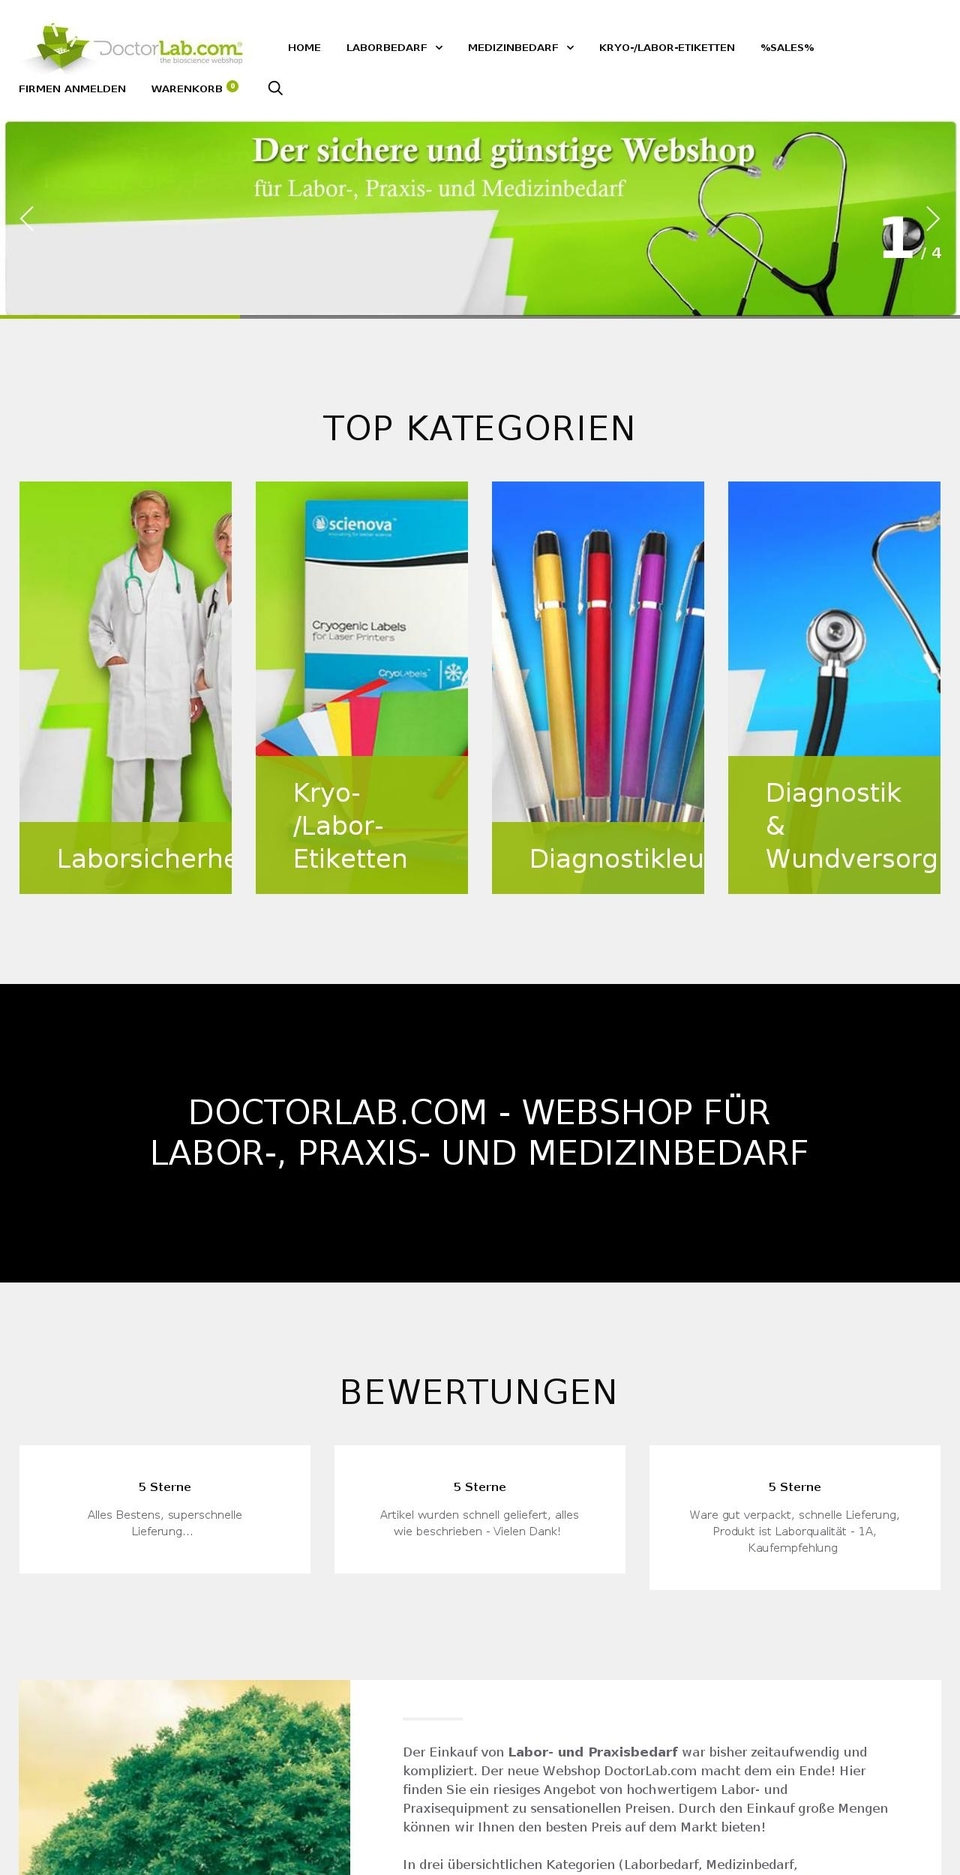 Trademark Shopify theme site example doctorlab.com